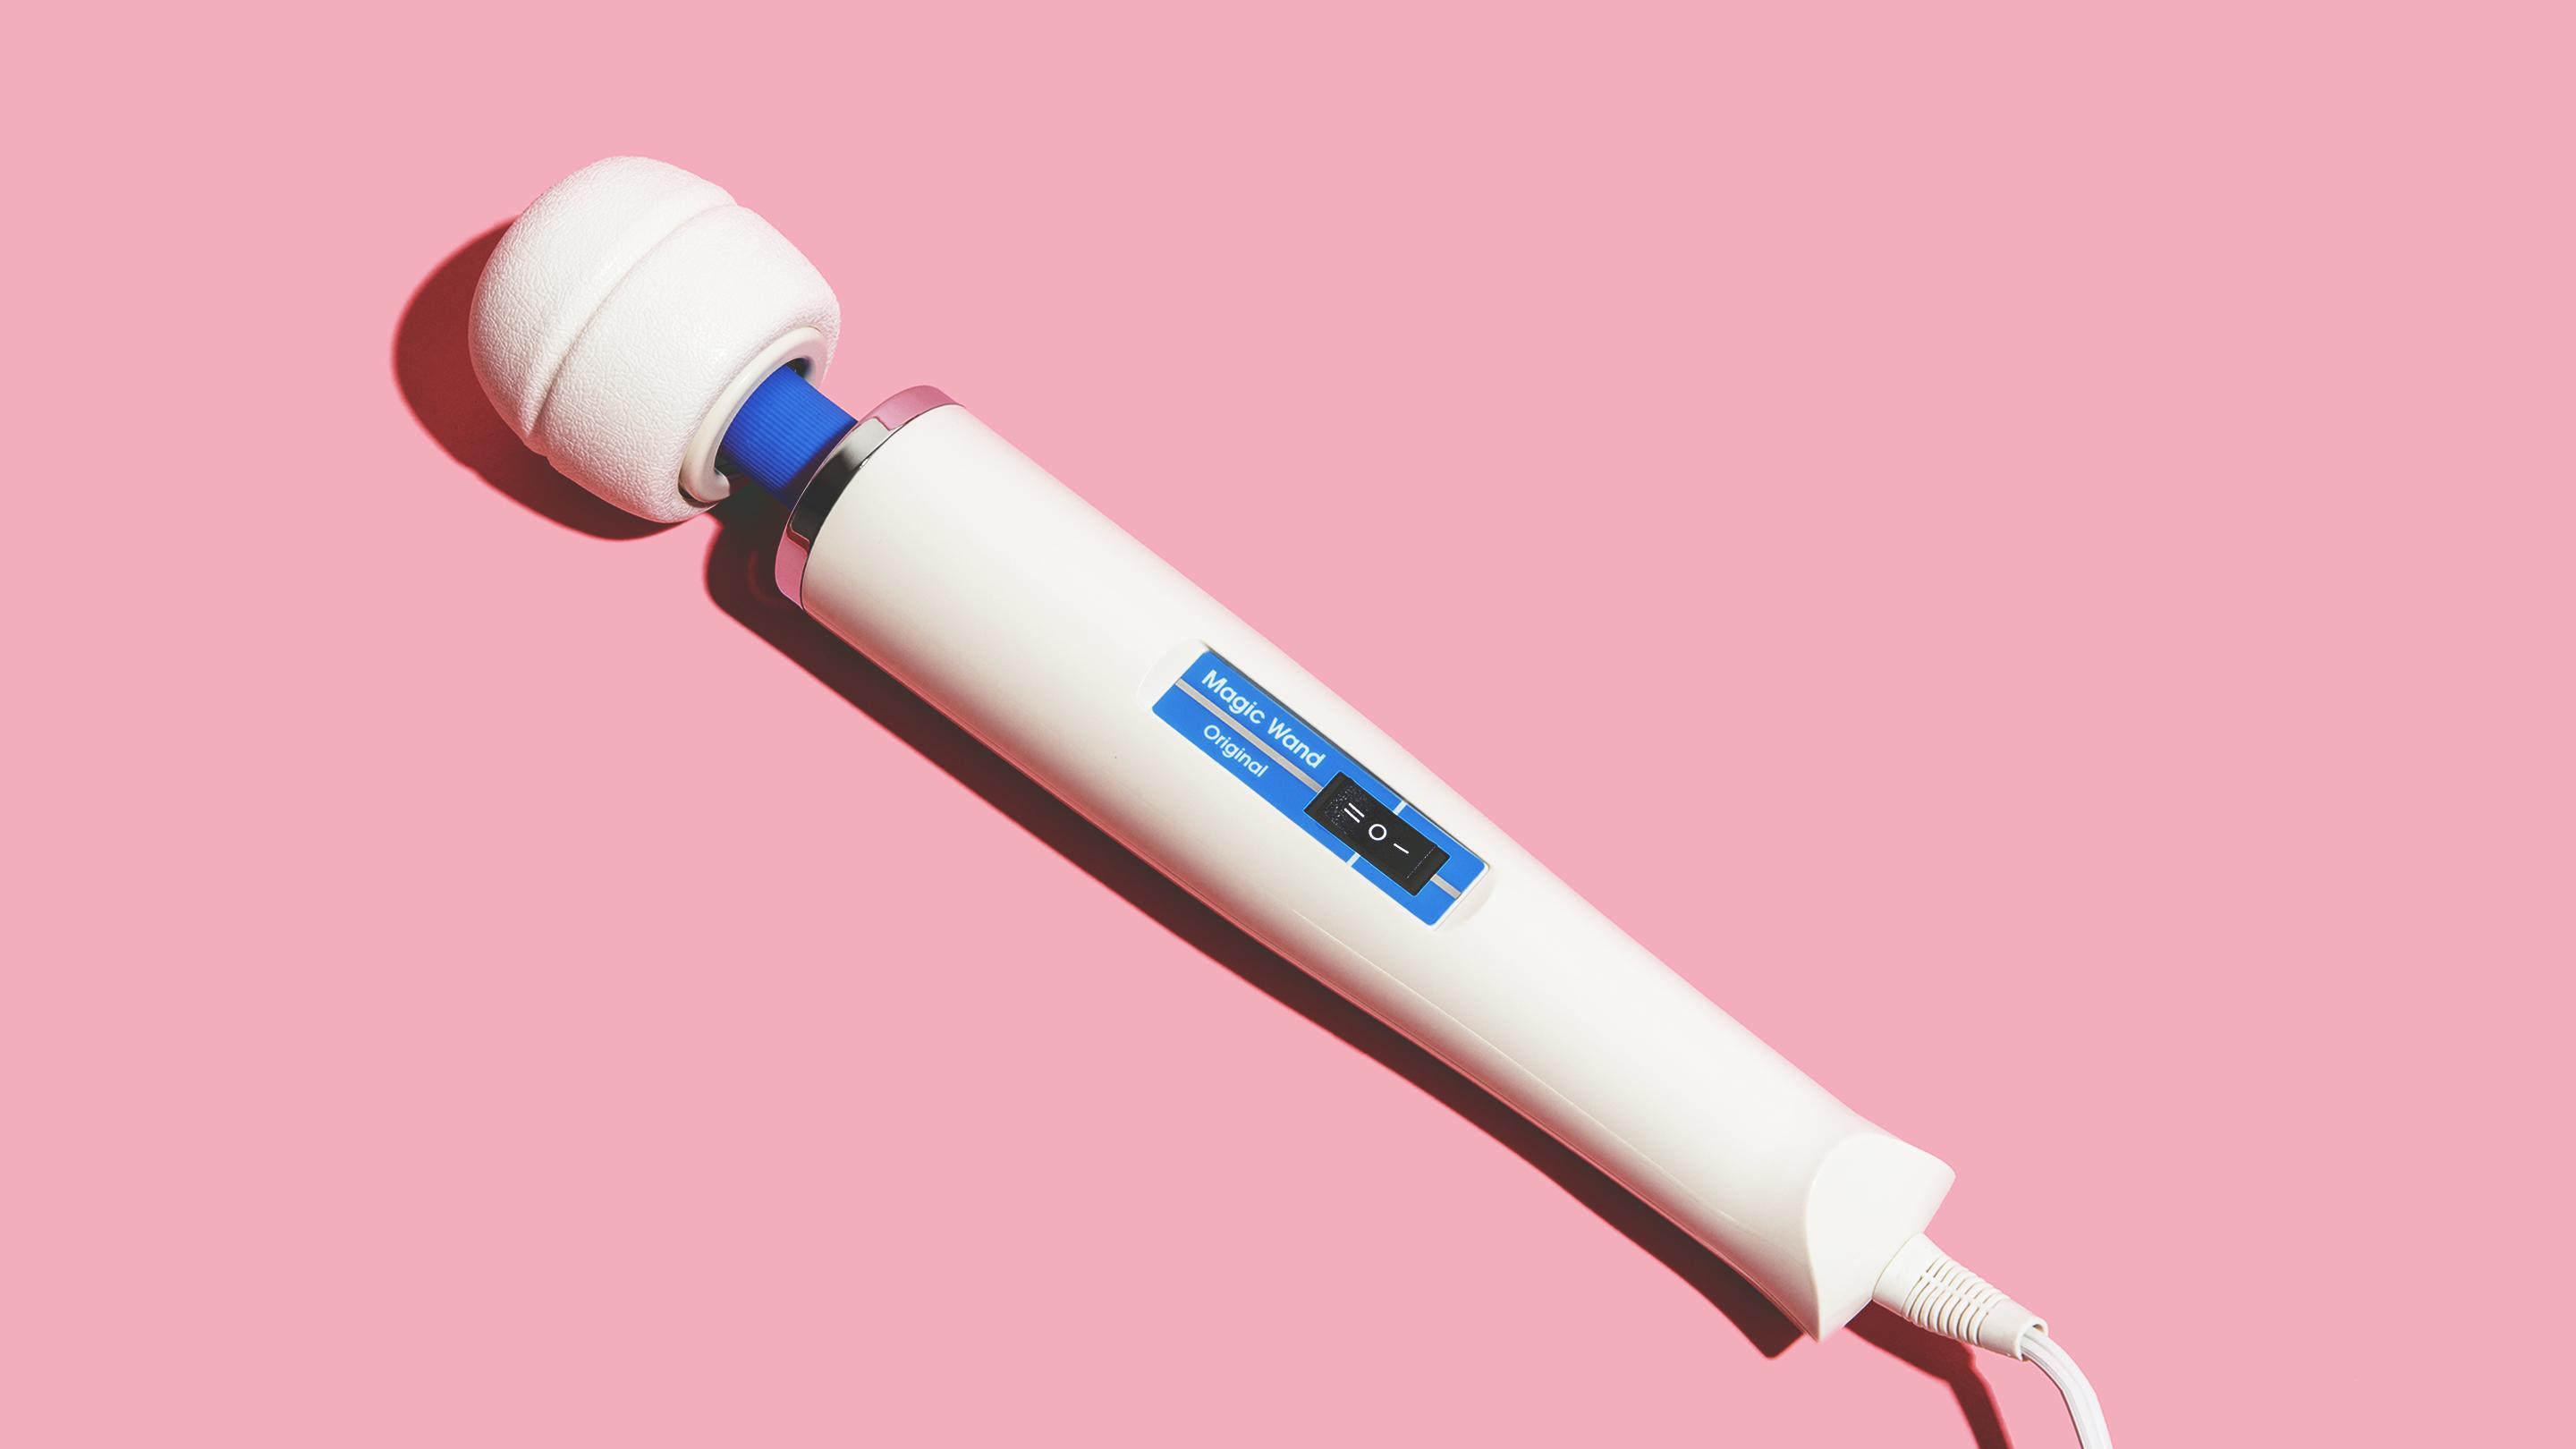 Why The Hitachi Magic Wand Has Kept Us Buzzing For 50 Years image pic